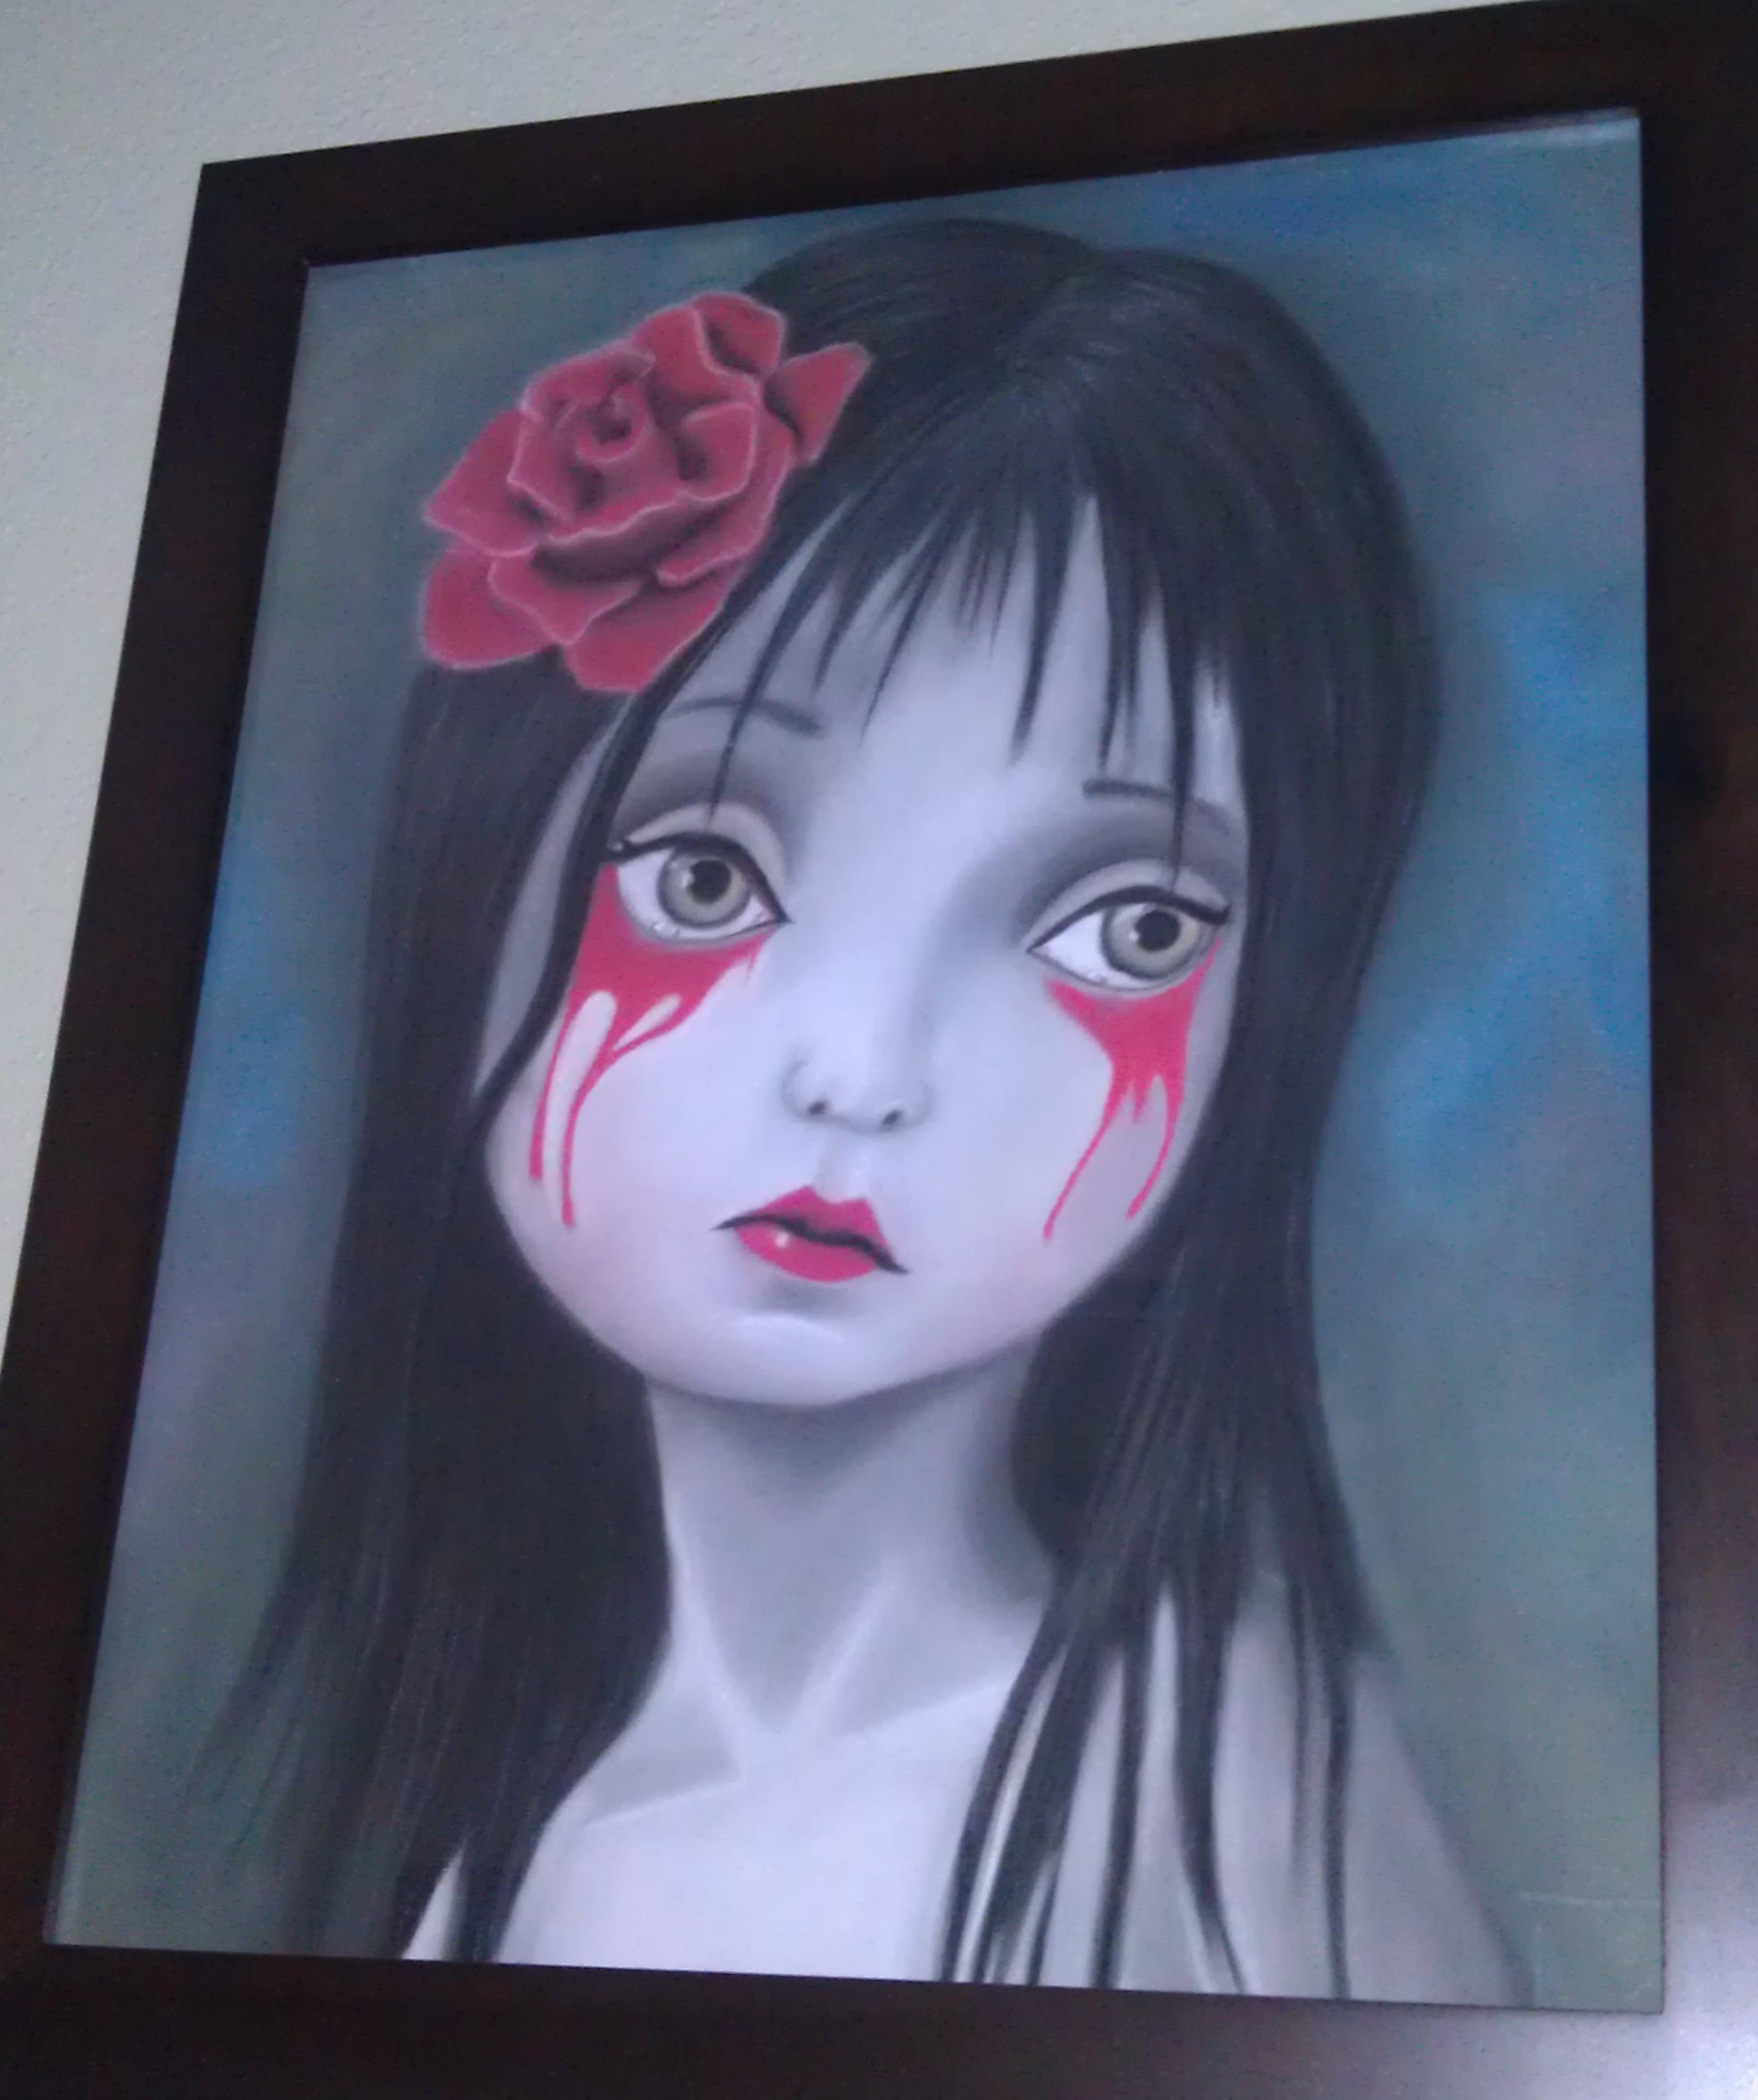 A copy/study of Mark Ryden's Rose painting